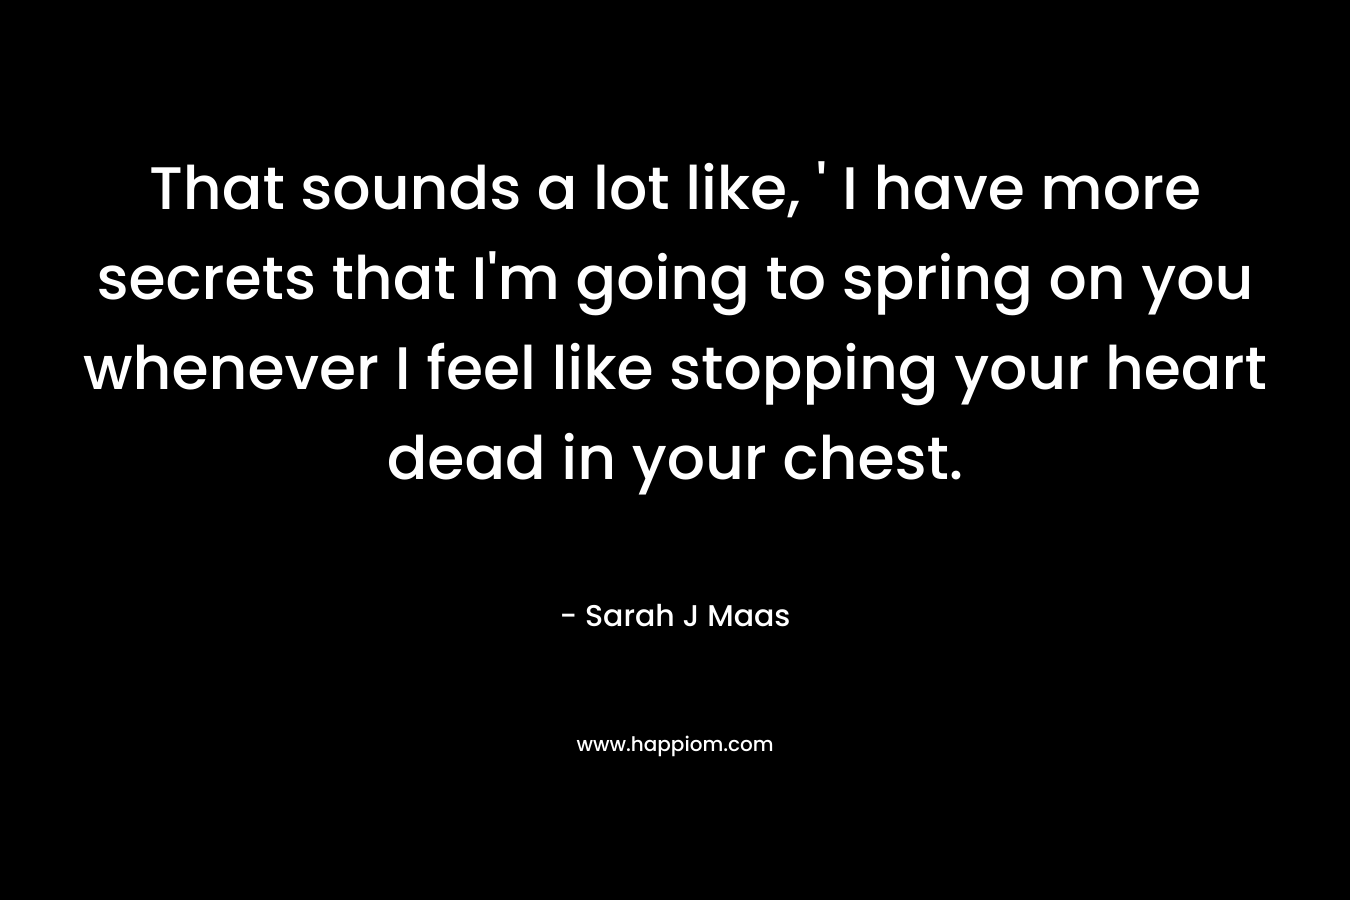 That sounds a lot like, ‘ I have more secrets that I’m going to spring on you whenever I feel like stopping your heart dead in your chest. – Sarah J Maas